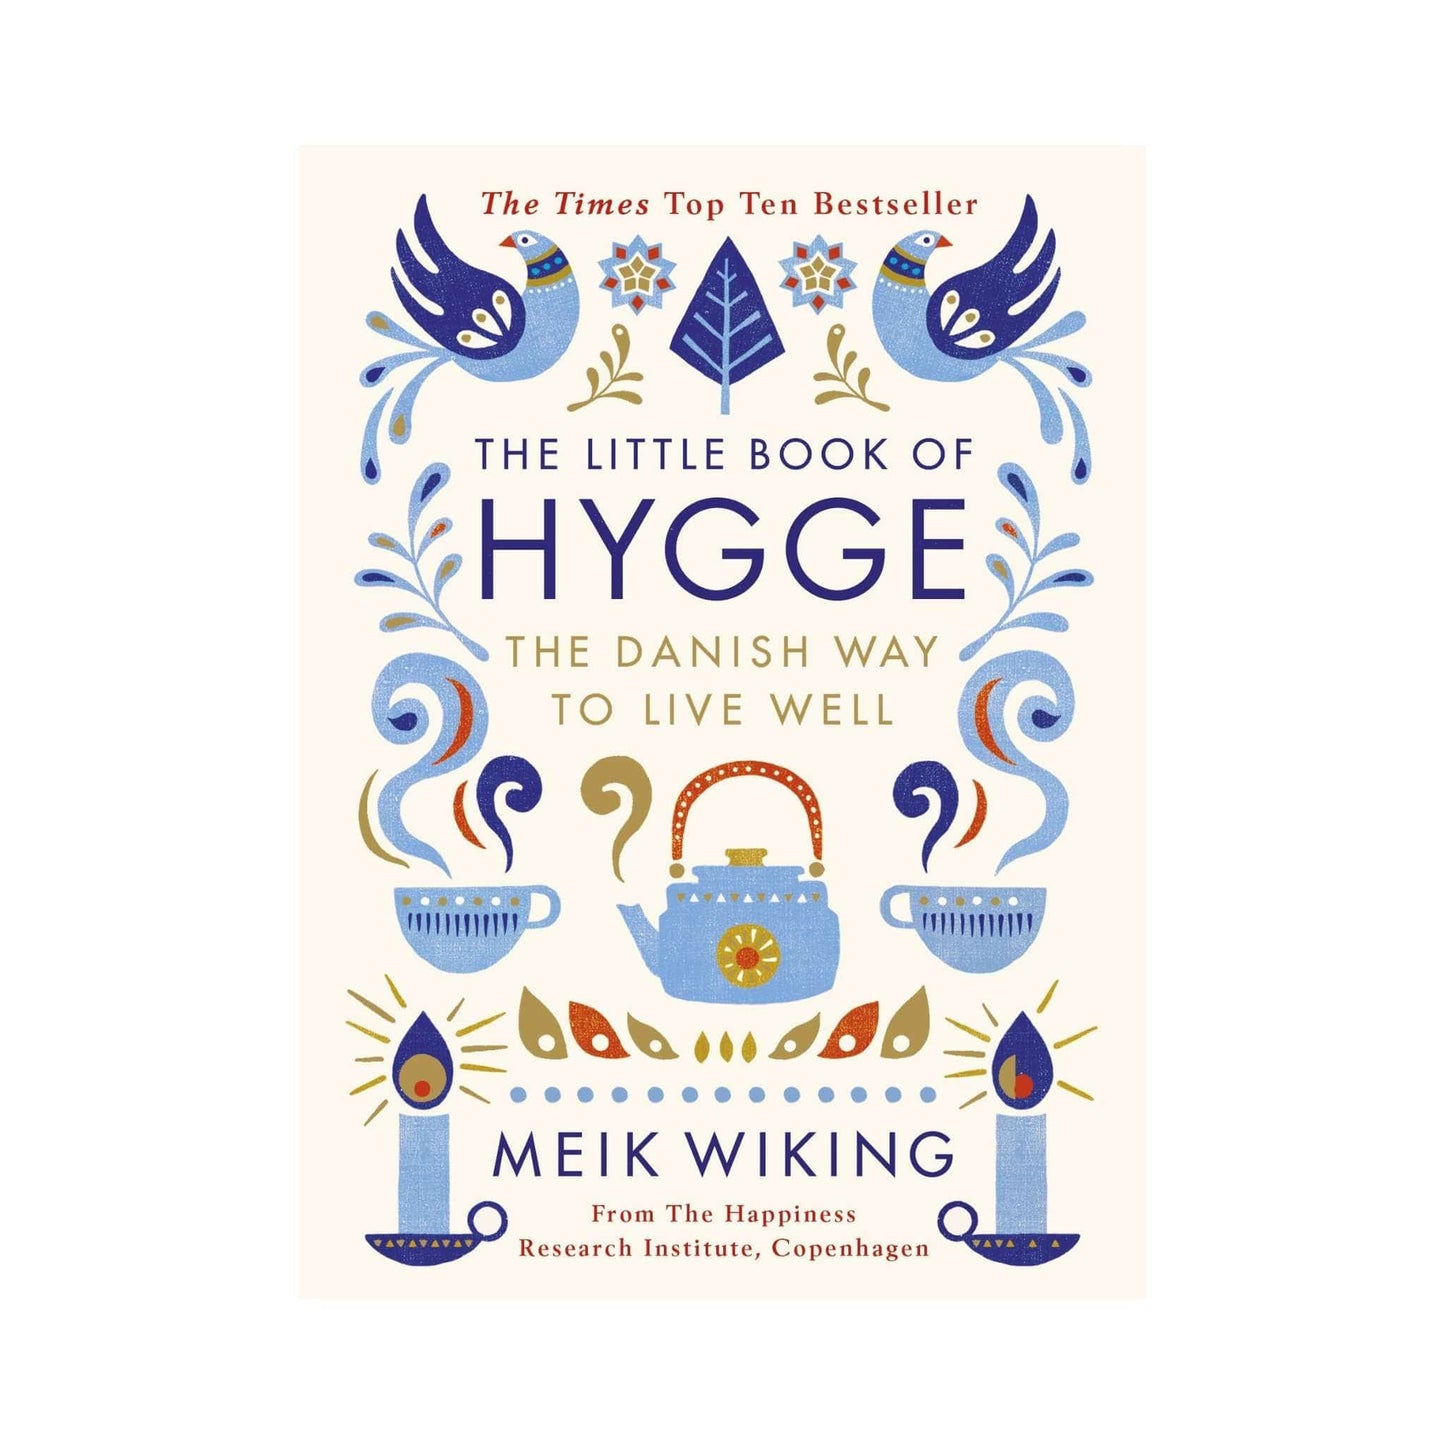 Load image into Gallery viewer, Our Bookshelf Print Books The Little Book of Hygge : The Danish Way to Live Well: The Million Copy Bestseller
